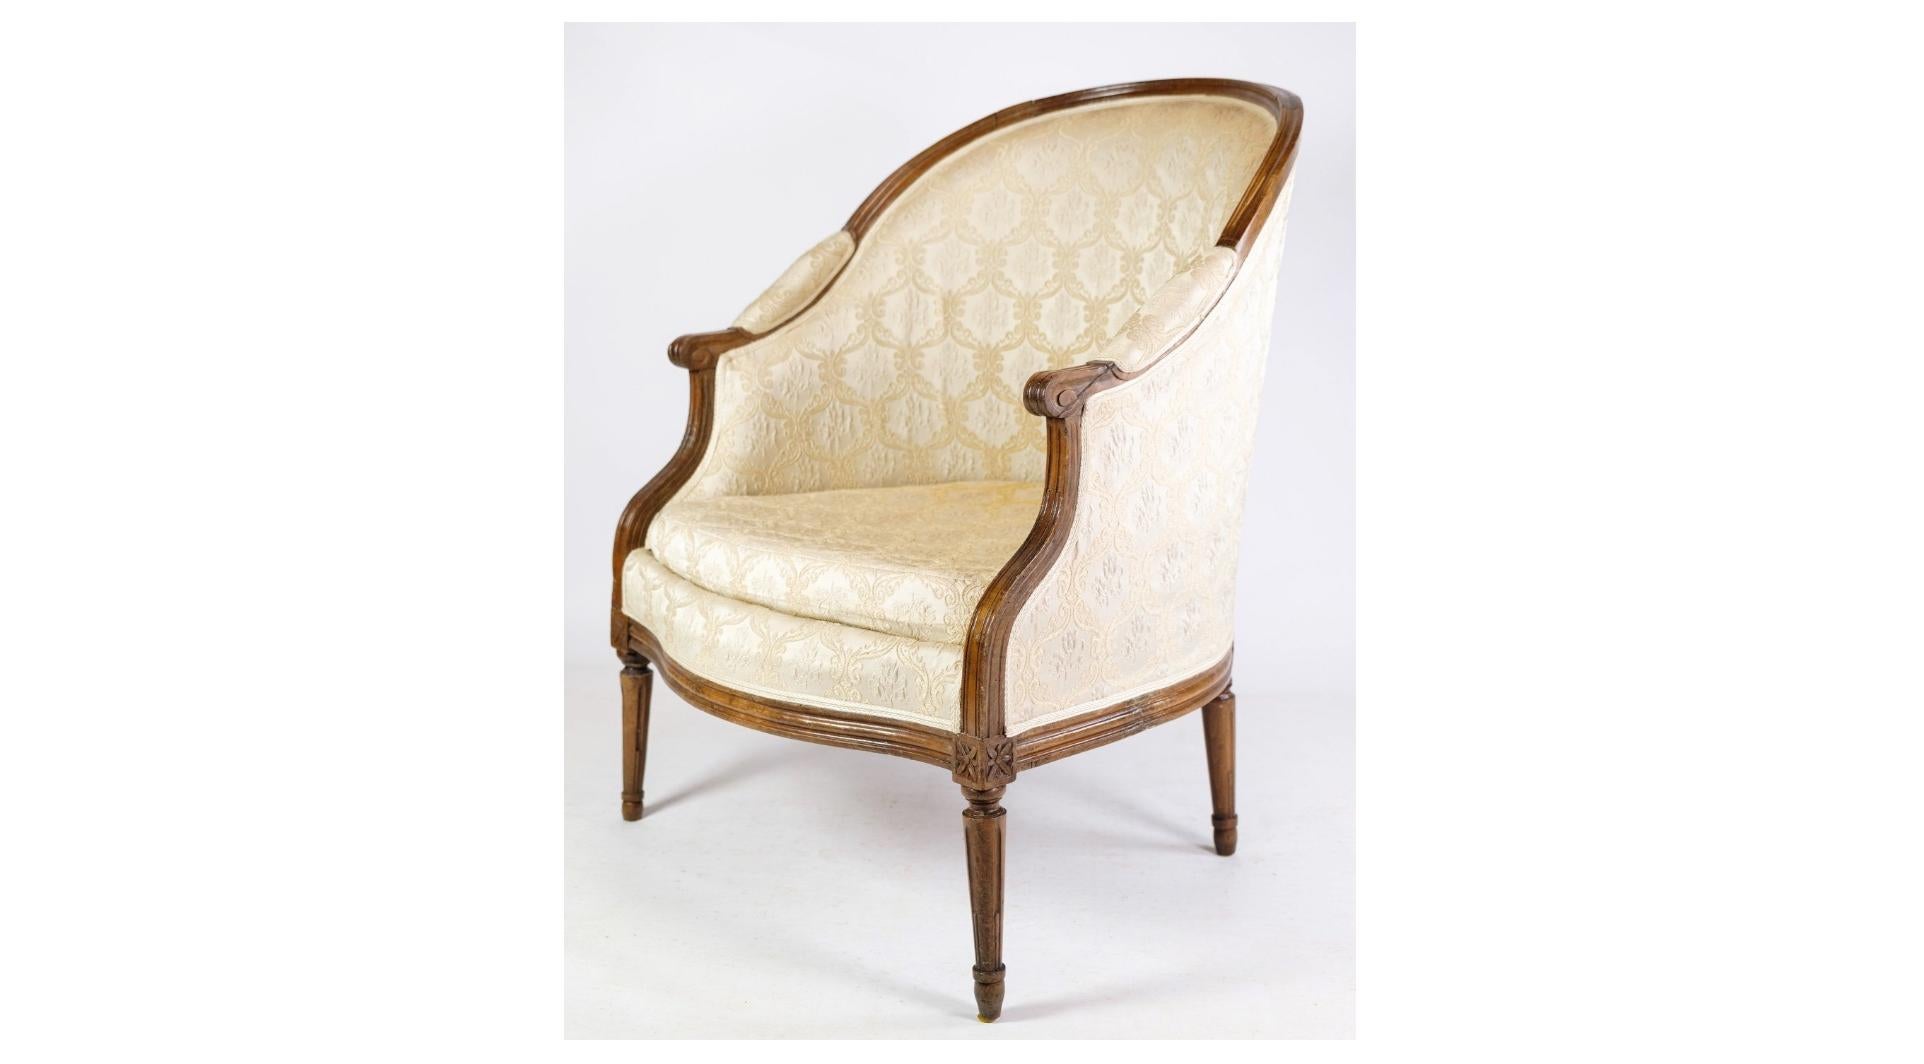 Crafted in the elegant style of the late 19th century, this set of two Louise Seize chairs exudes timeless charm and sophistication. Made from polished mahogany, these chairs boast a rich and lustrous finish that adds a touch of opulence to any